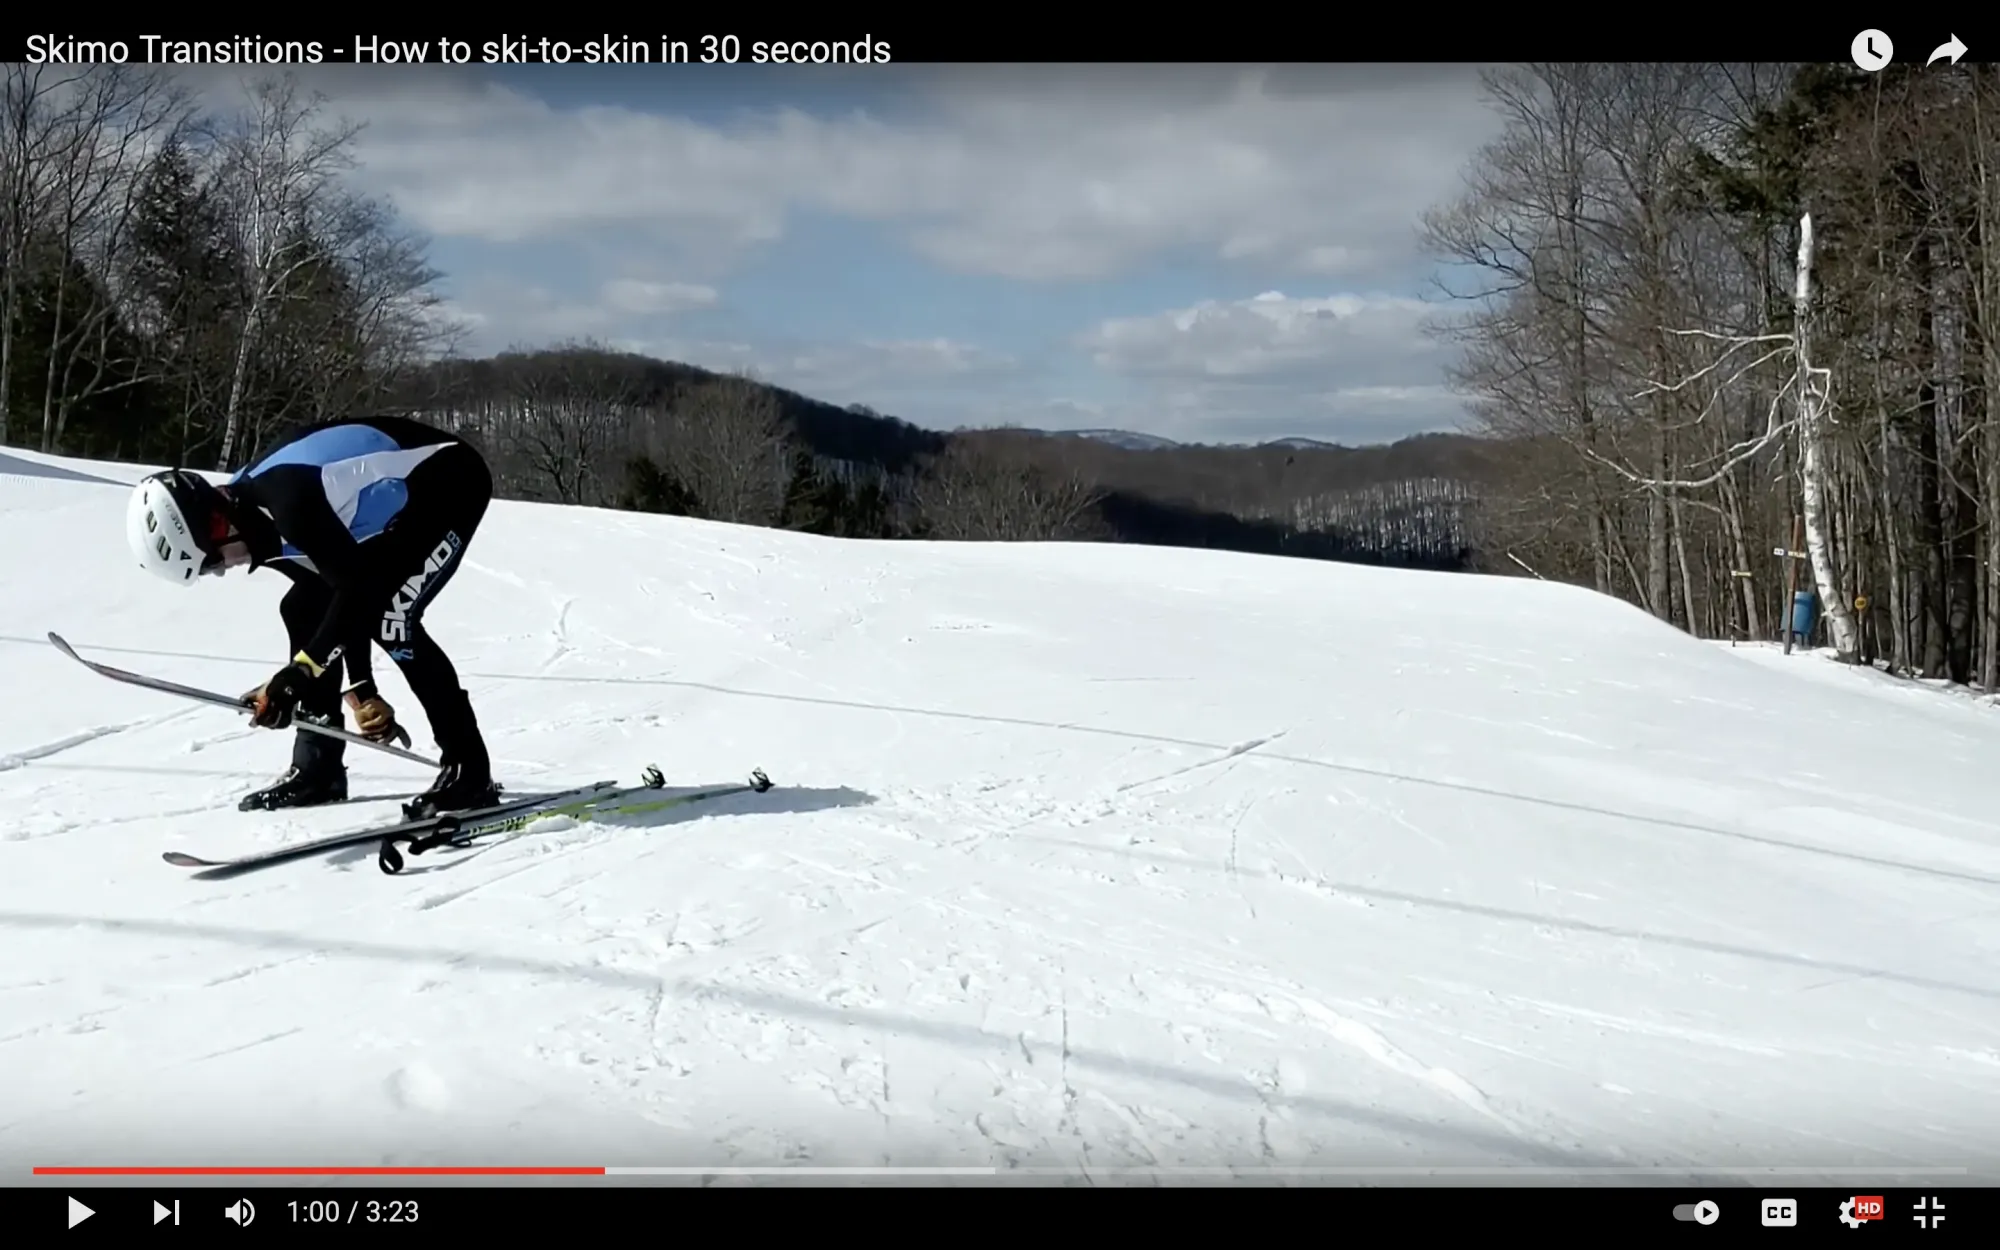 An image of lifting the right-hand ski